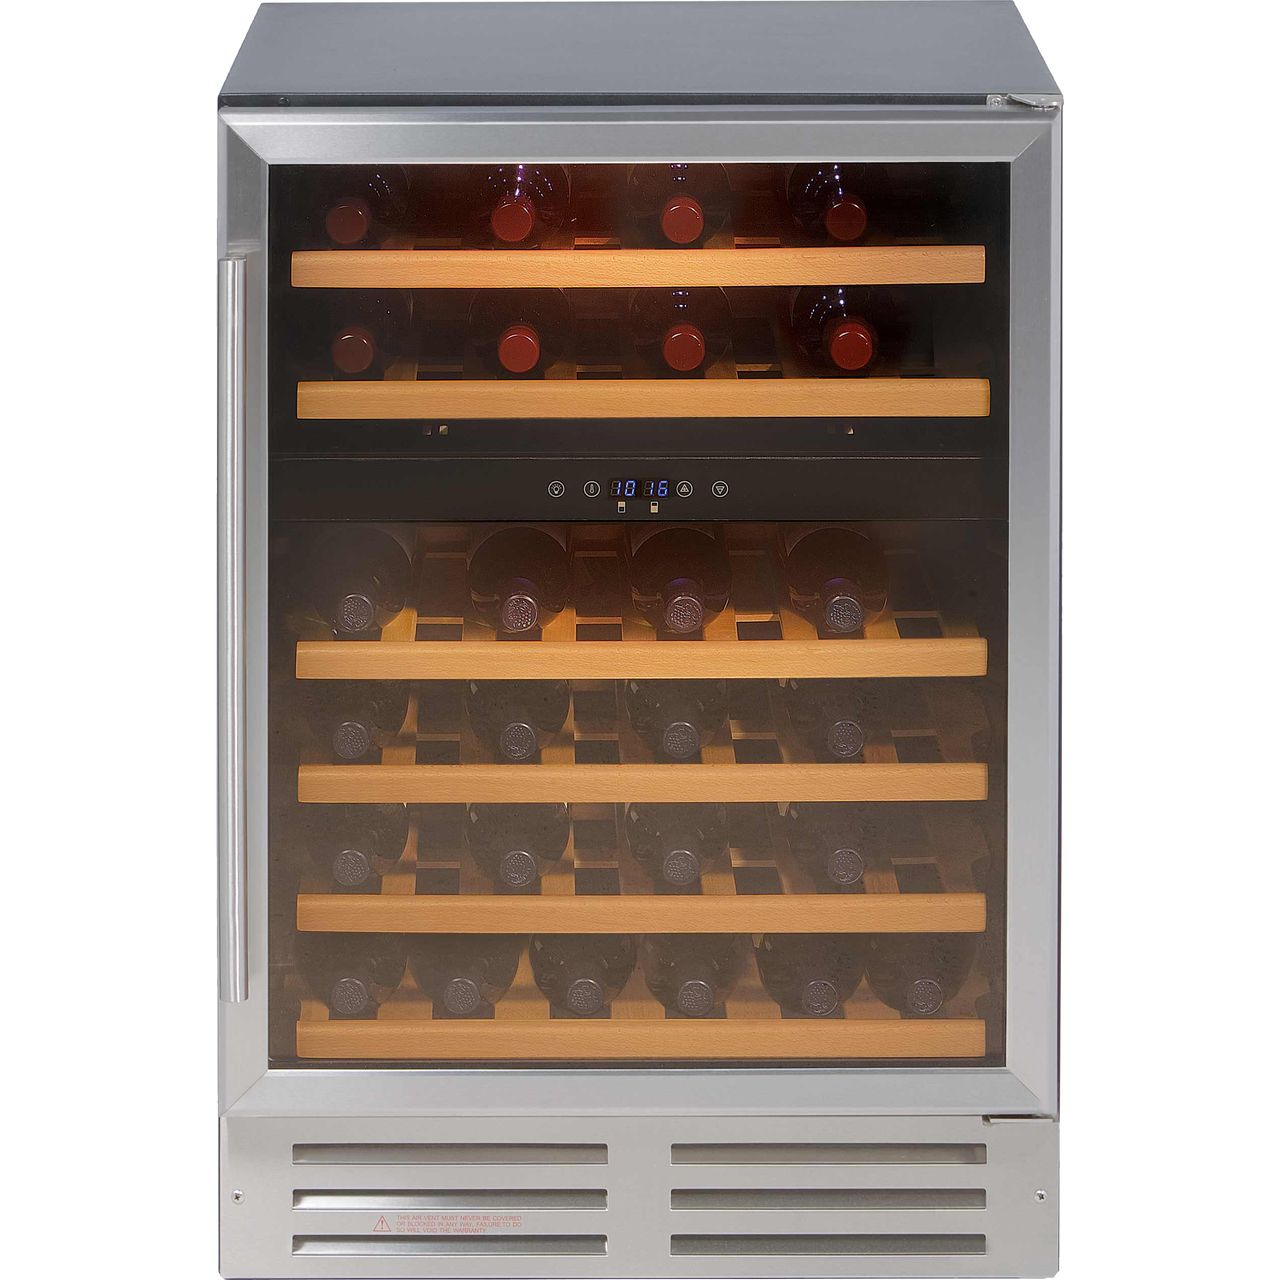 Belling Unbranded 600SSWC Built In Wine Cooler Review